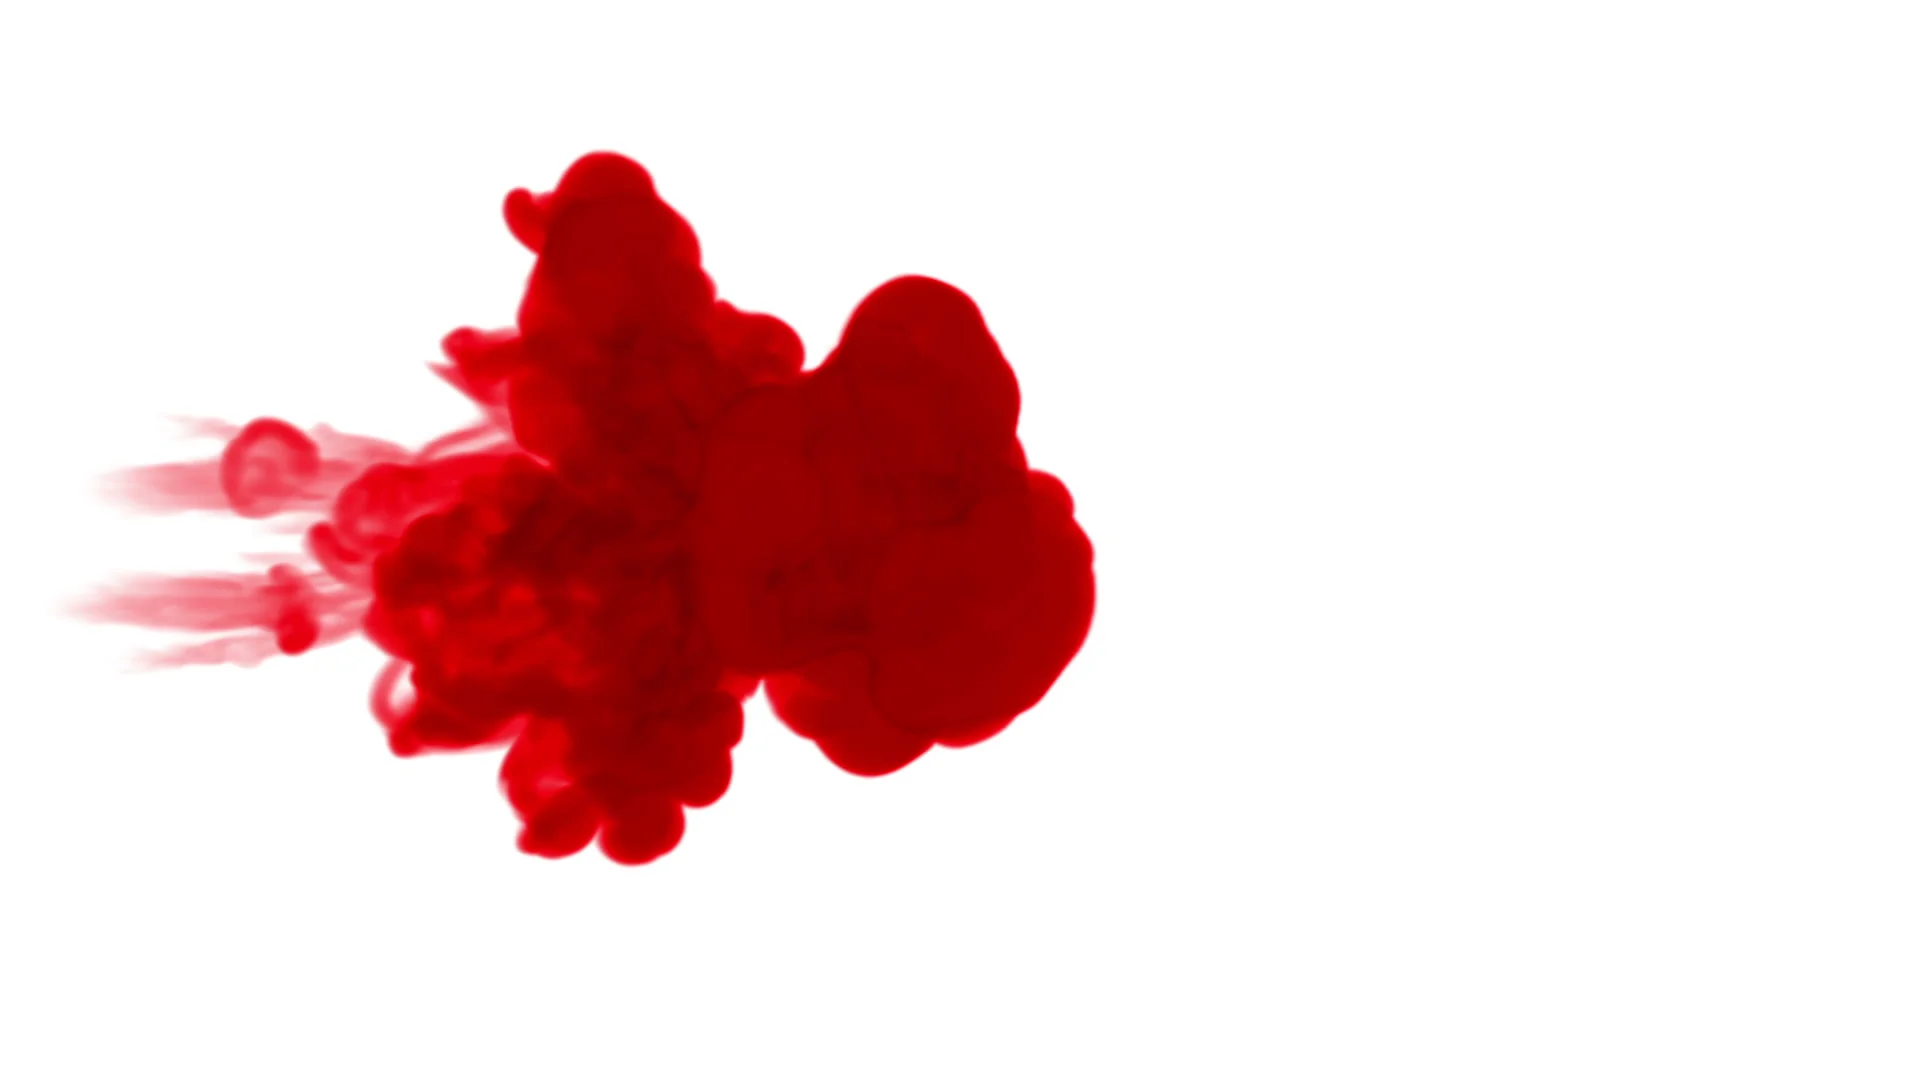 ink in water png